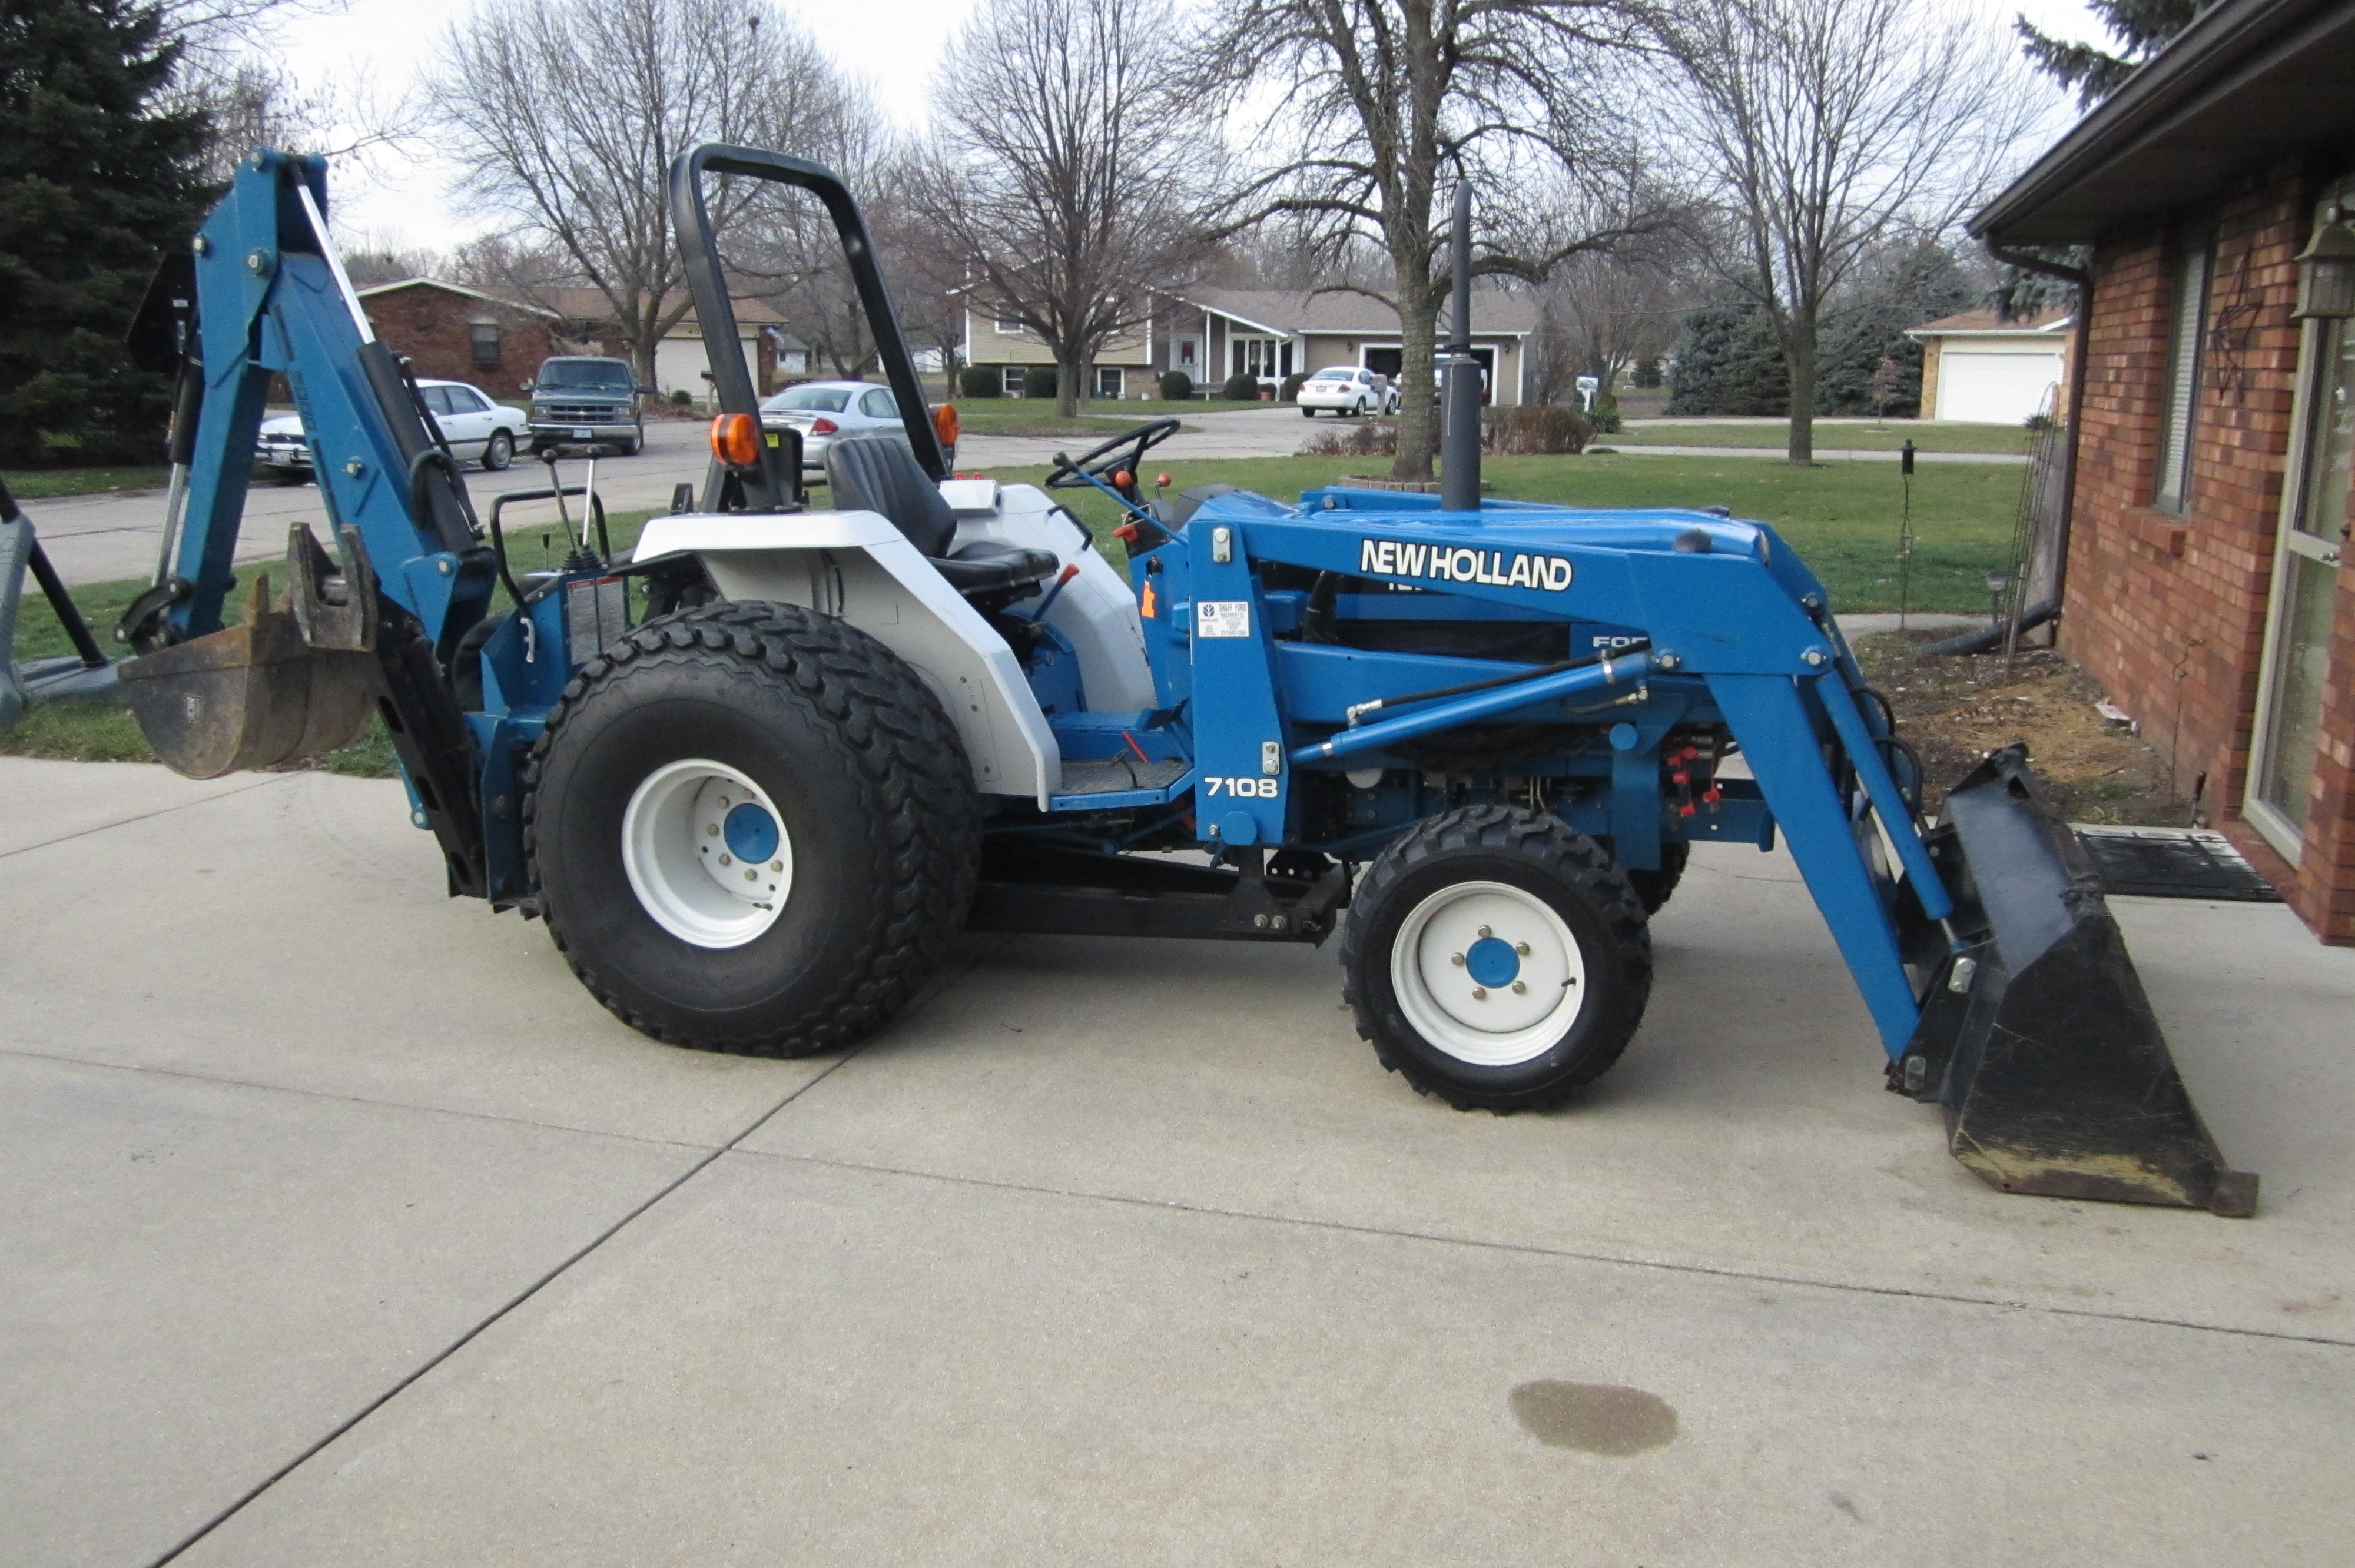 NEW HOLLAND 1920 For Sale - TractorHouse.com